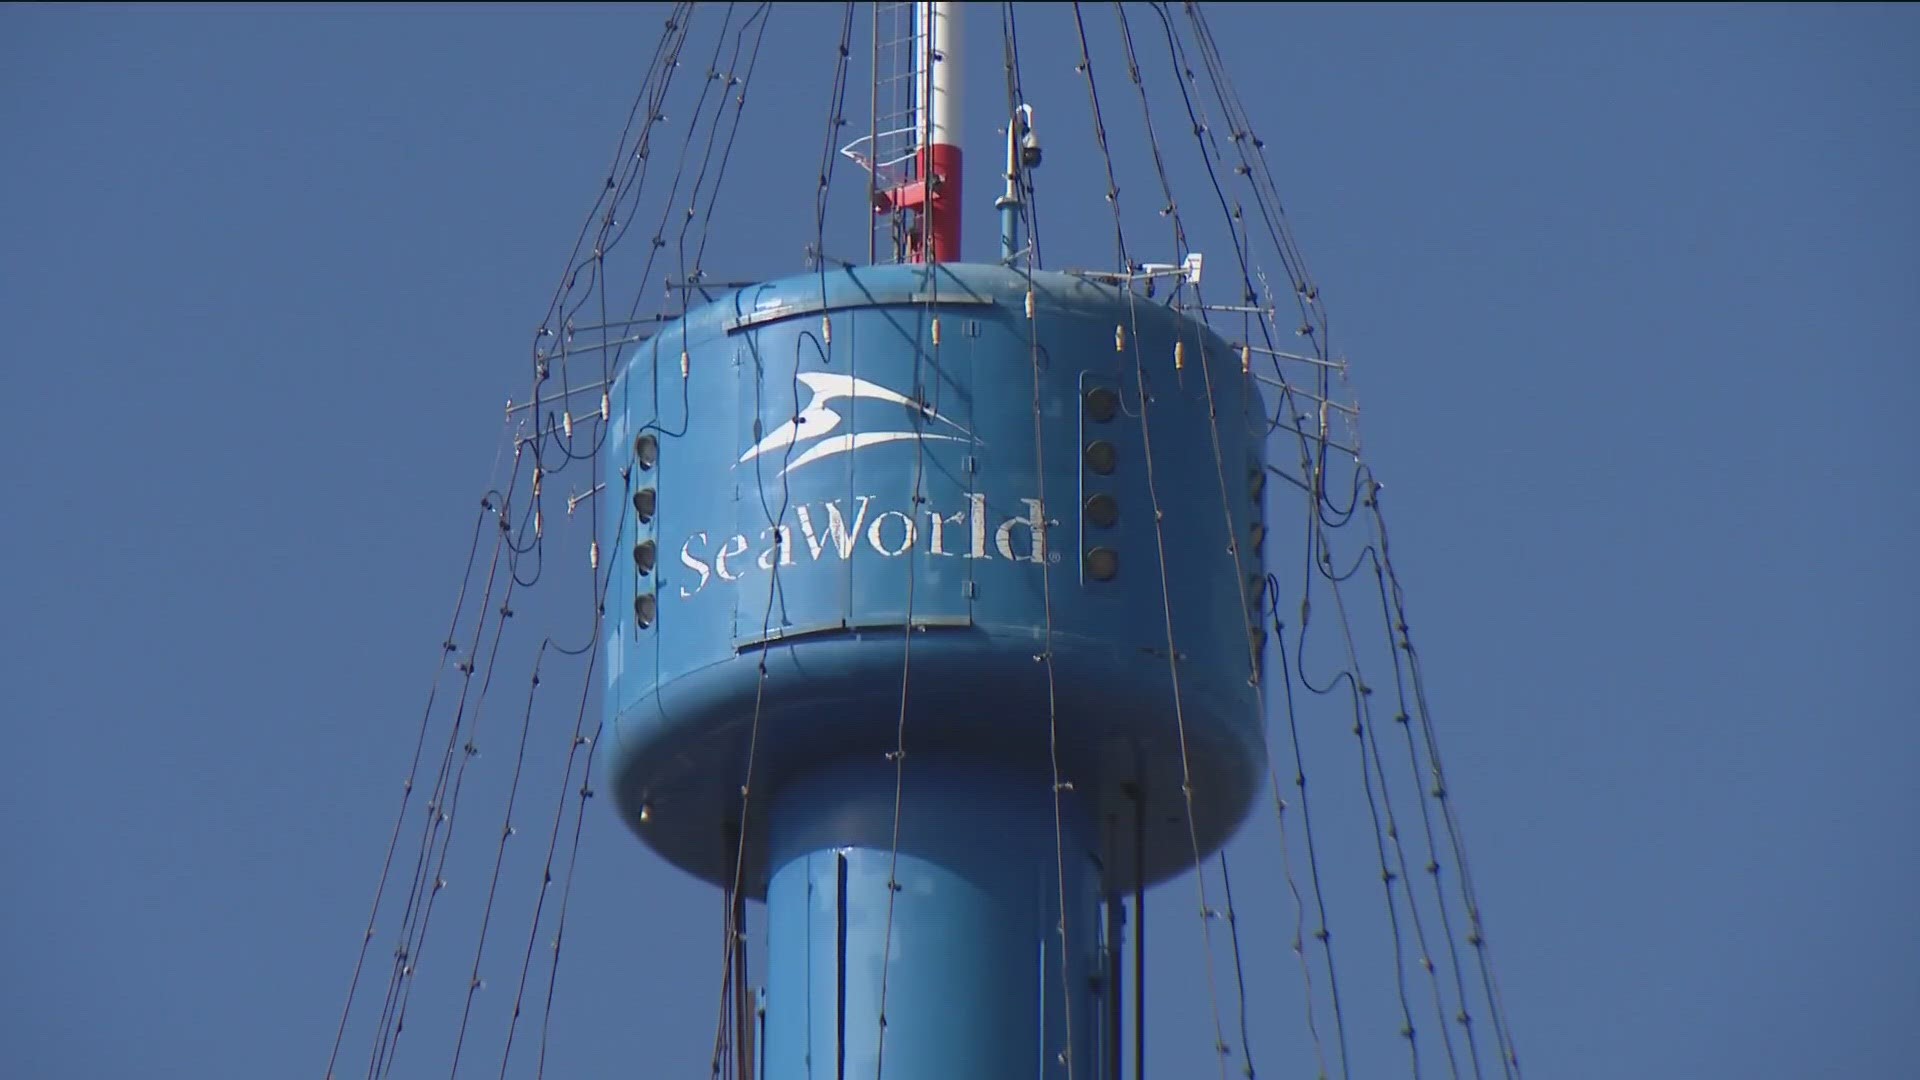 The City first warned SeaWorld more than a year ago that it owed more than $9.7 million from 2020, which included late penalties and interest.